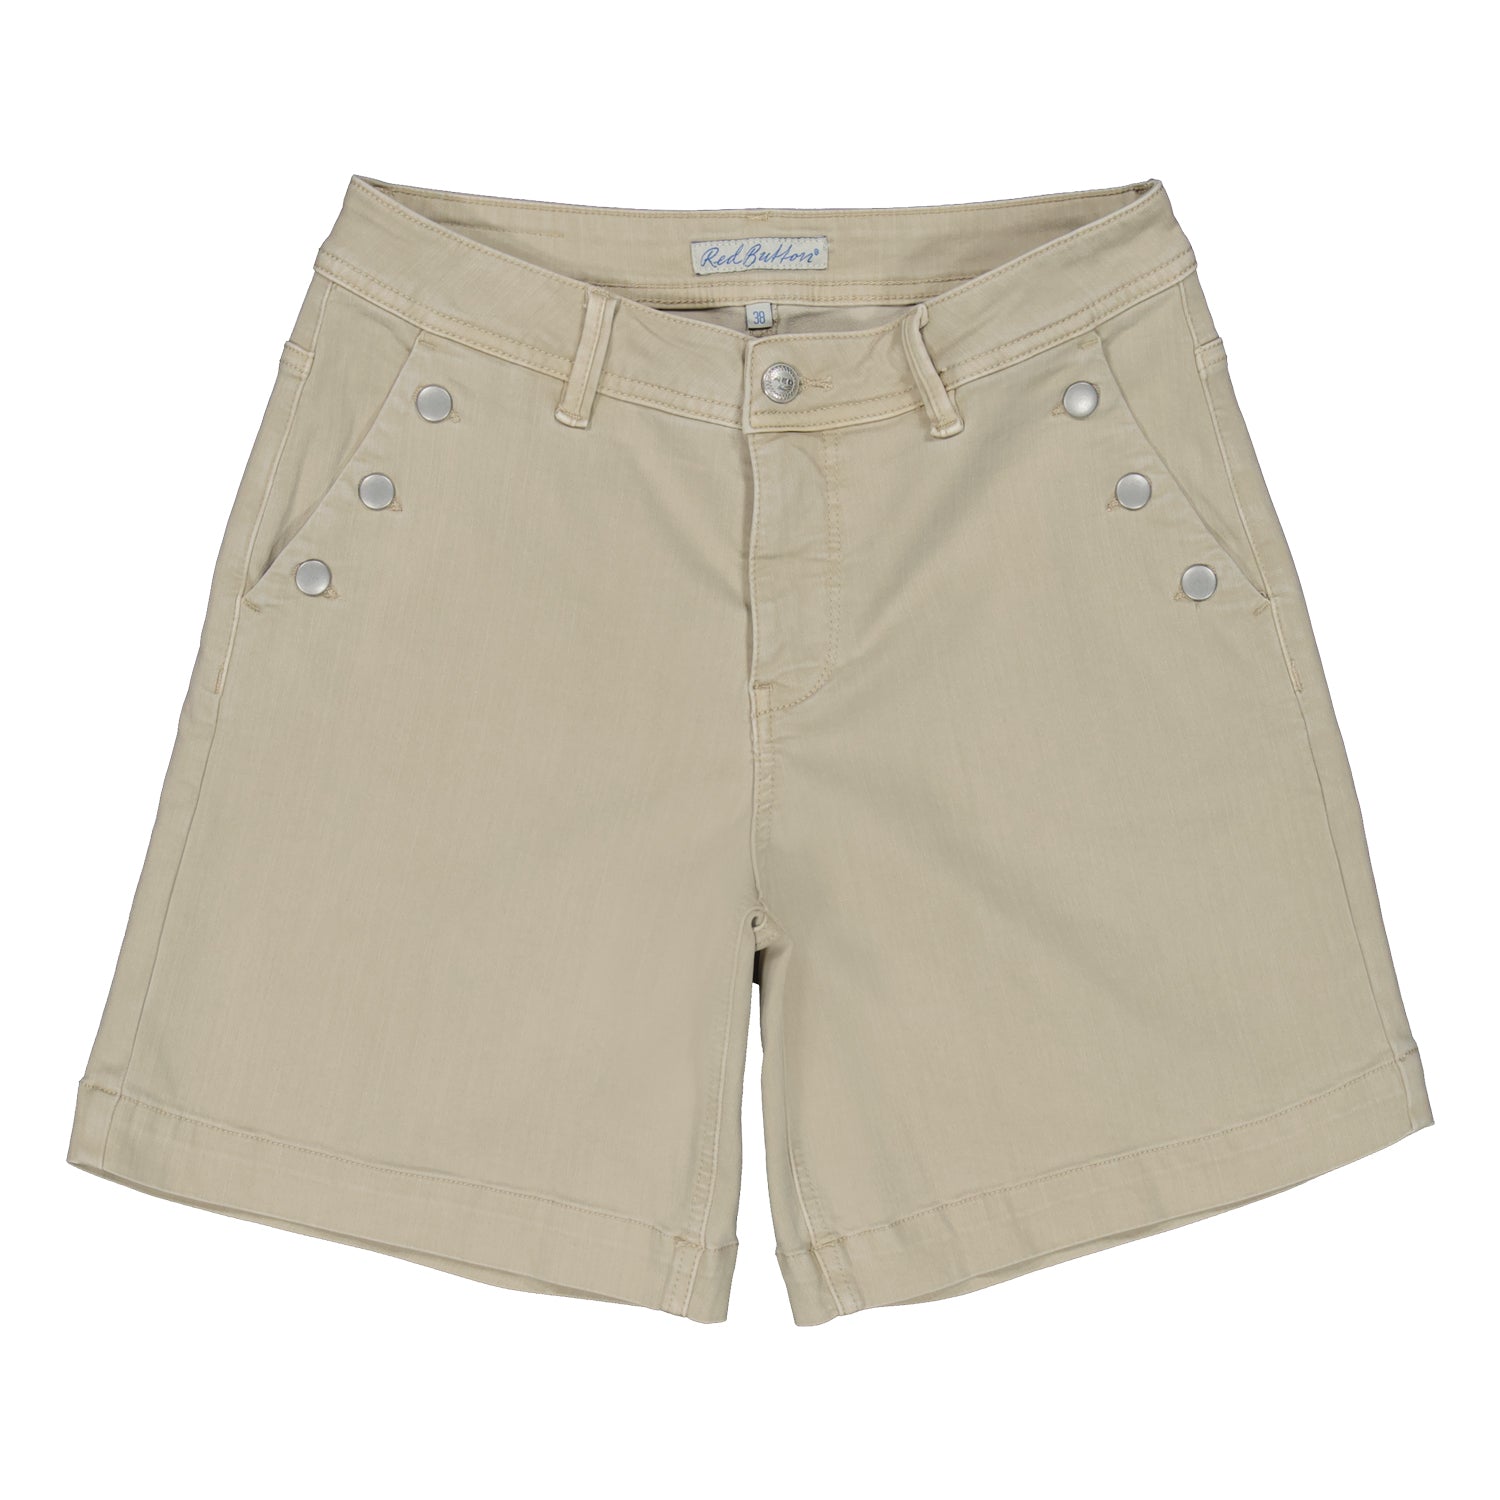 BEBE Cotton Blend Shorts in Blush or Stone